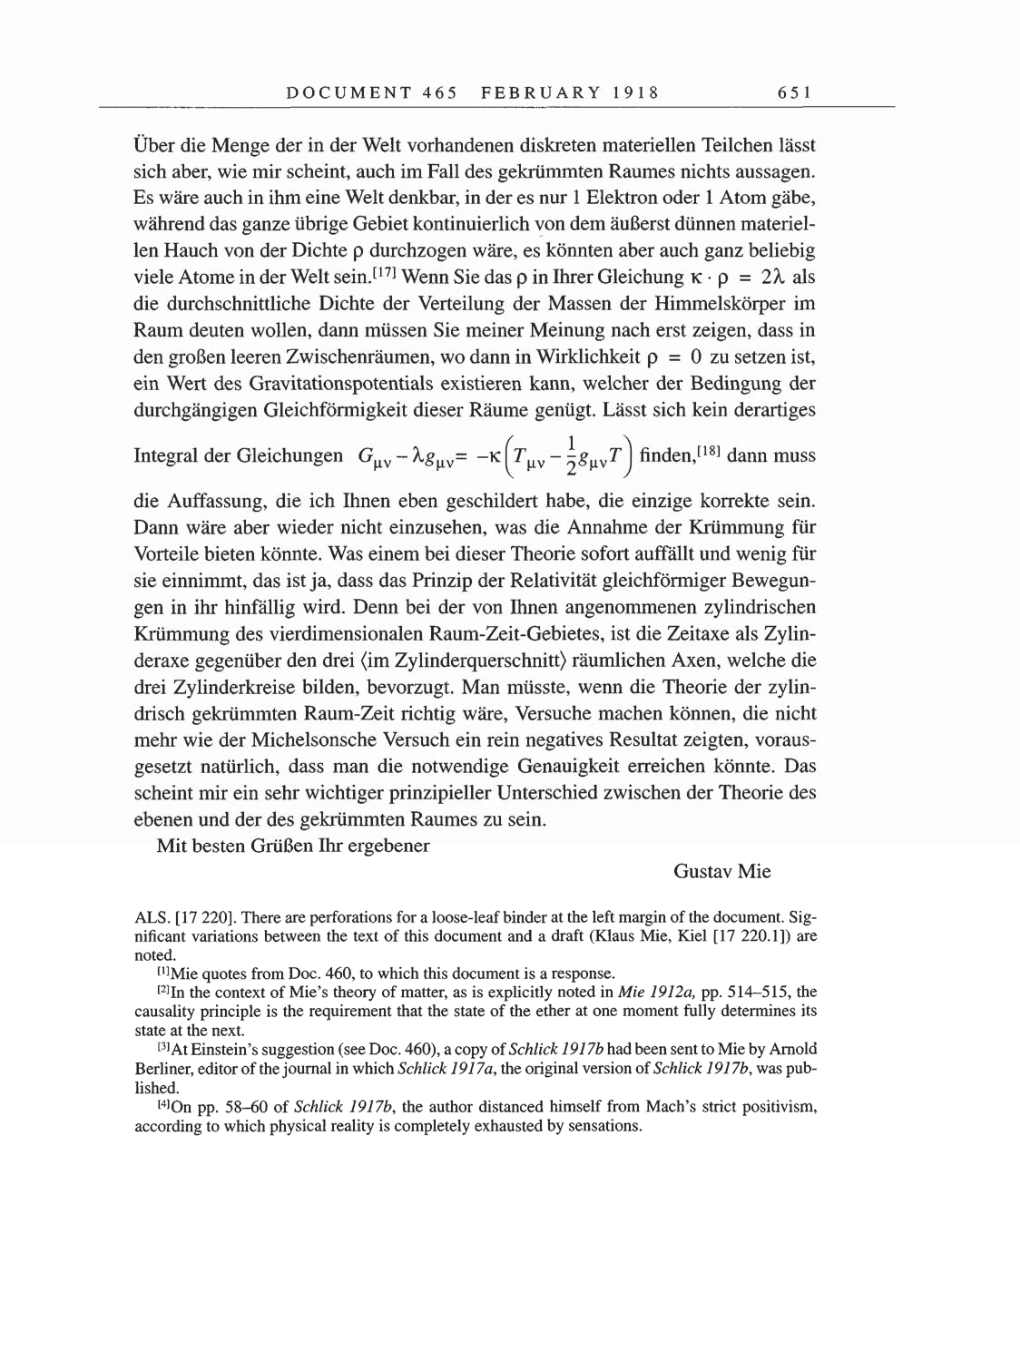 Volume 8, Part B: The Berlin Years: Correspondence 1918 page 651